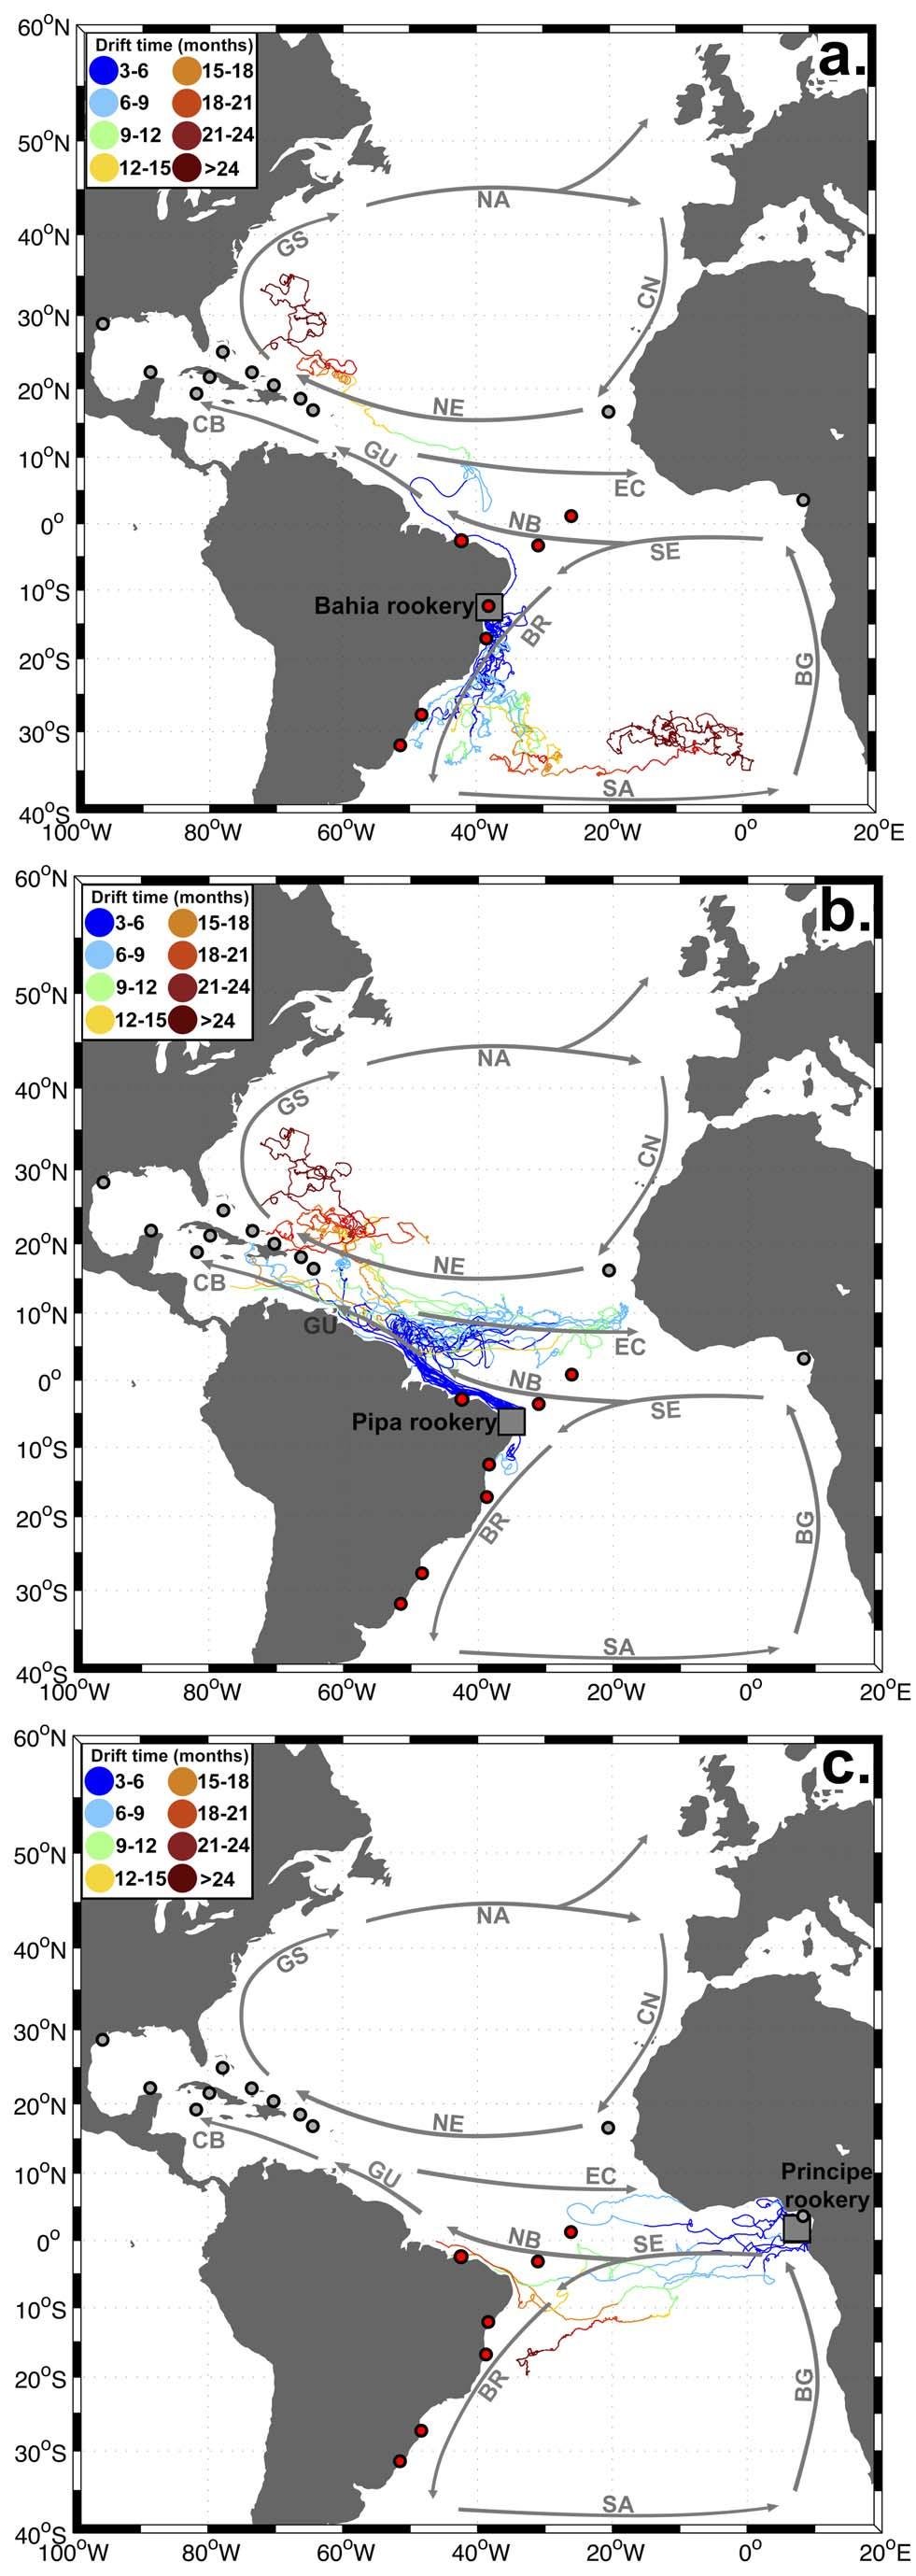 Figure 4. Pathways of drifters passing by Atlantic Ocean rookeries Bahia (a.), Pipa (b.) and Principe (c.). Drifter pathways for the other Atlantic rookeries are shown in Figure S3.